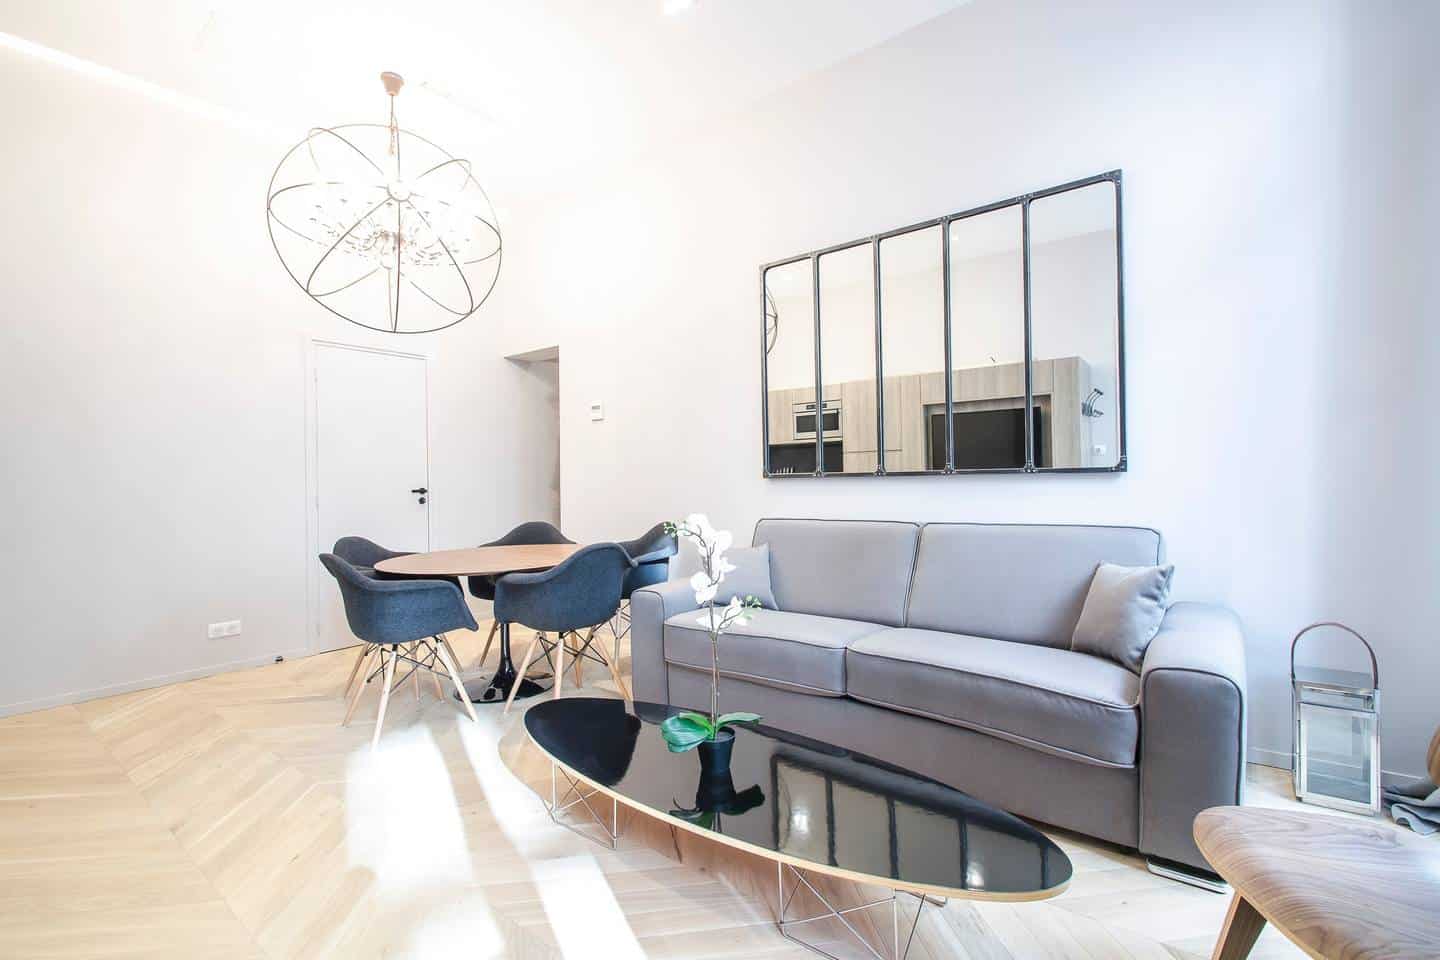 Wow! This Airbnb Paris listing near Place de l’Opéra is dreamy. You have to see the pictures!